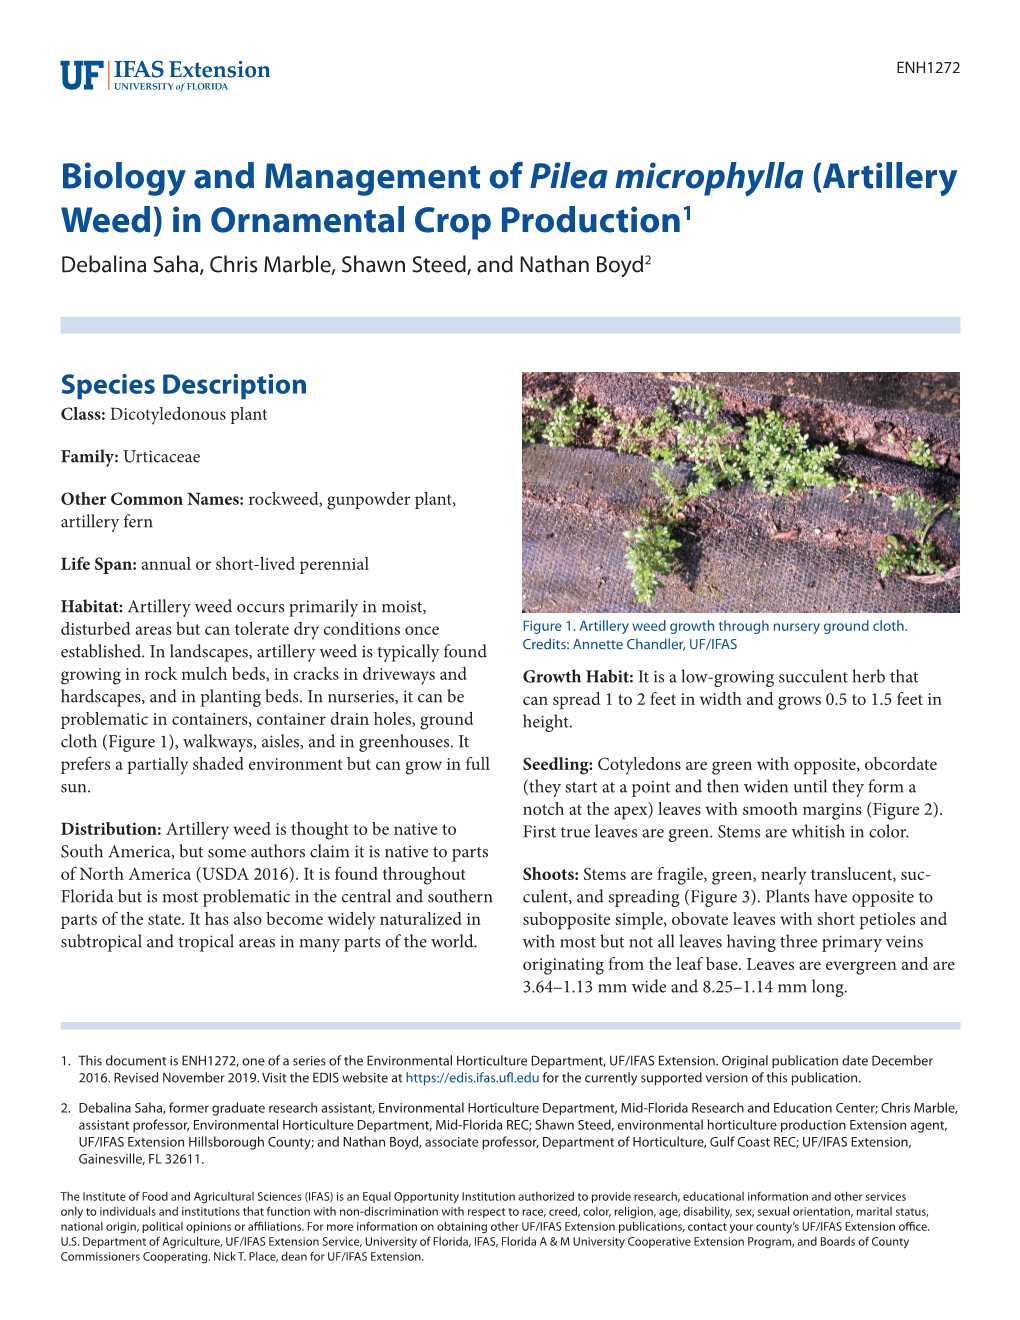 Biology and Management of Pilea Microphylla (Artillery Weed) in Ornamental Crop Production1 Debalina Saha, Chris Marble, Shawn Steed, and Nathan Boyd2